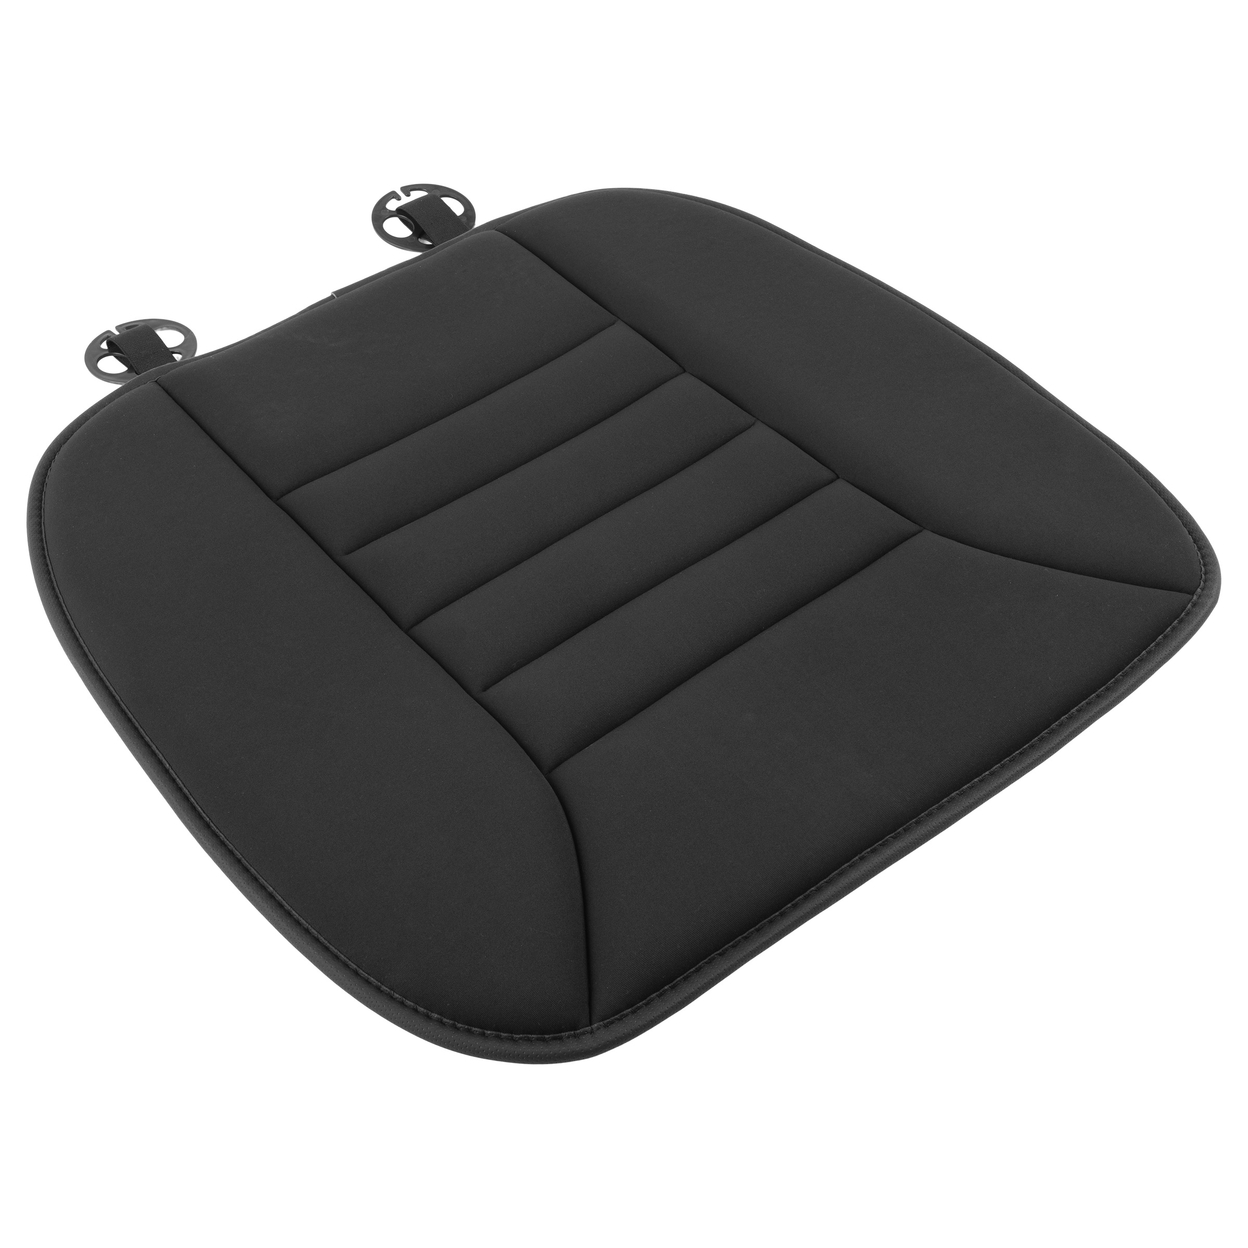 Car Seat Cushion 1.2in Thick Memory Foam Seat Pad For Auto Office Home, Black